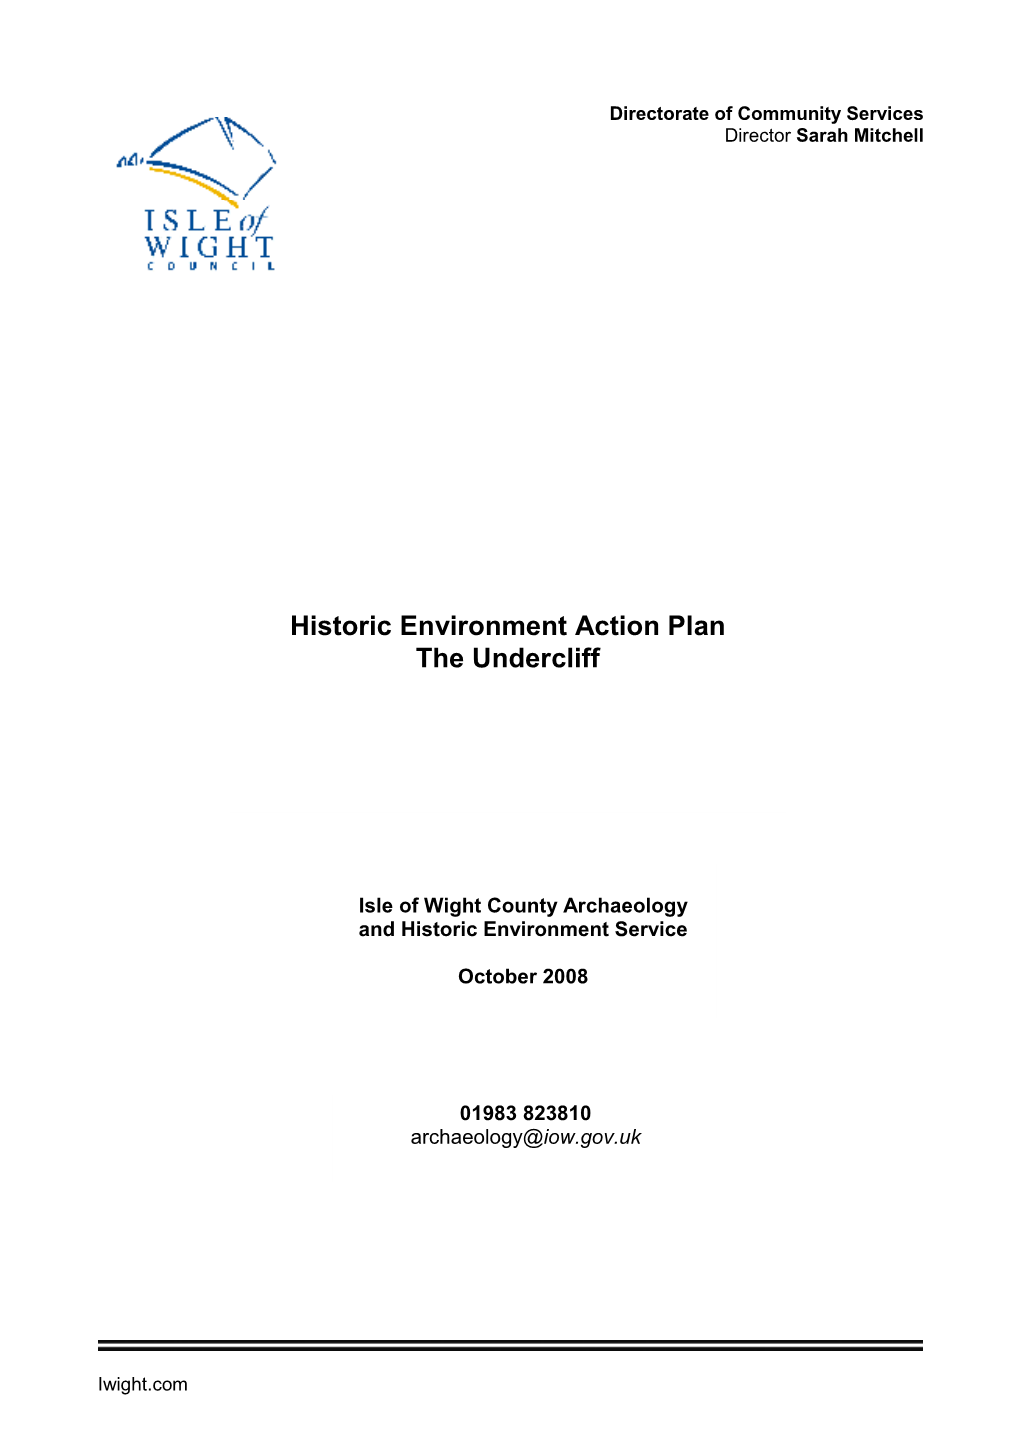 Historic Environment Action Plan the Undercliff